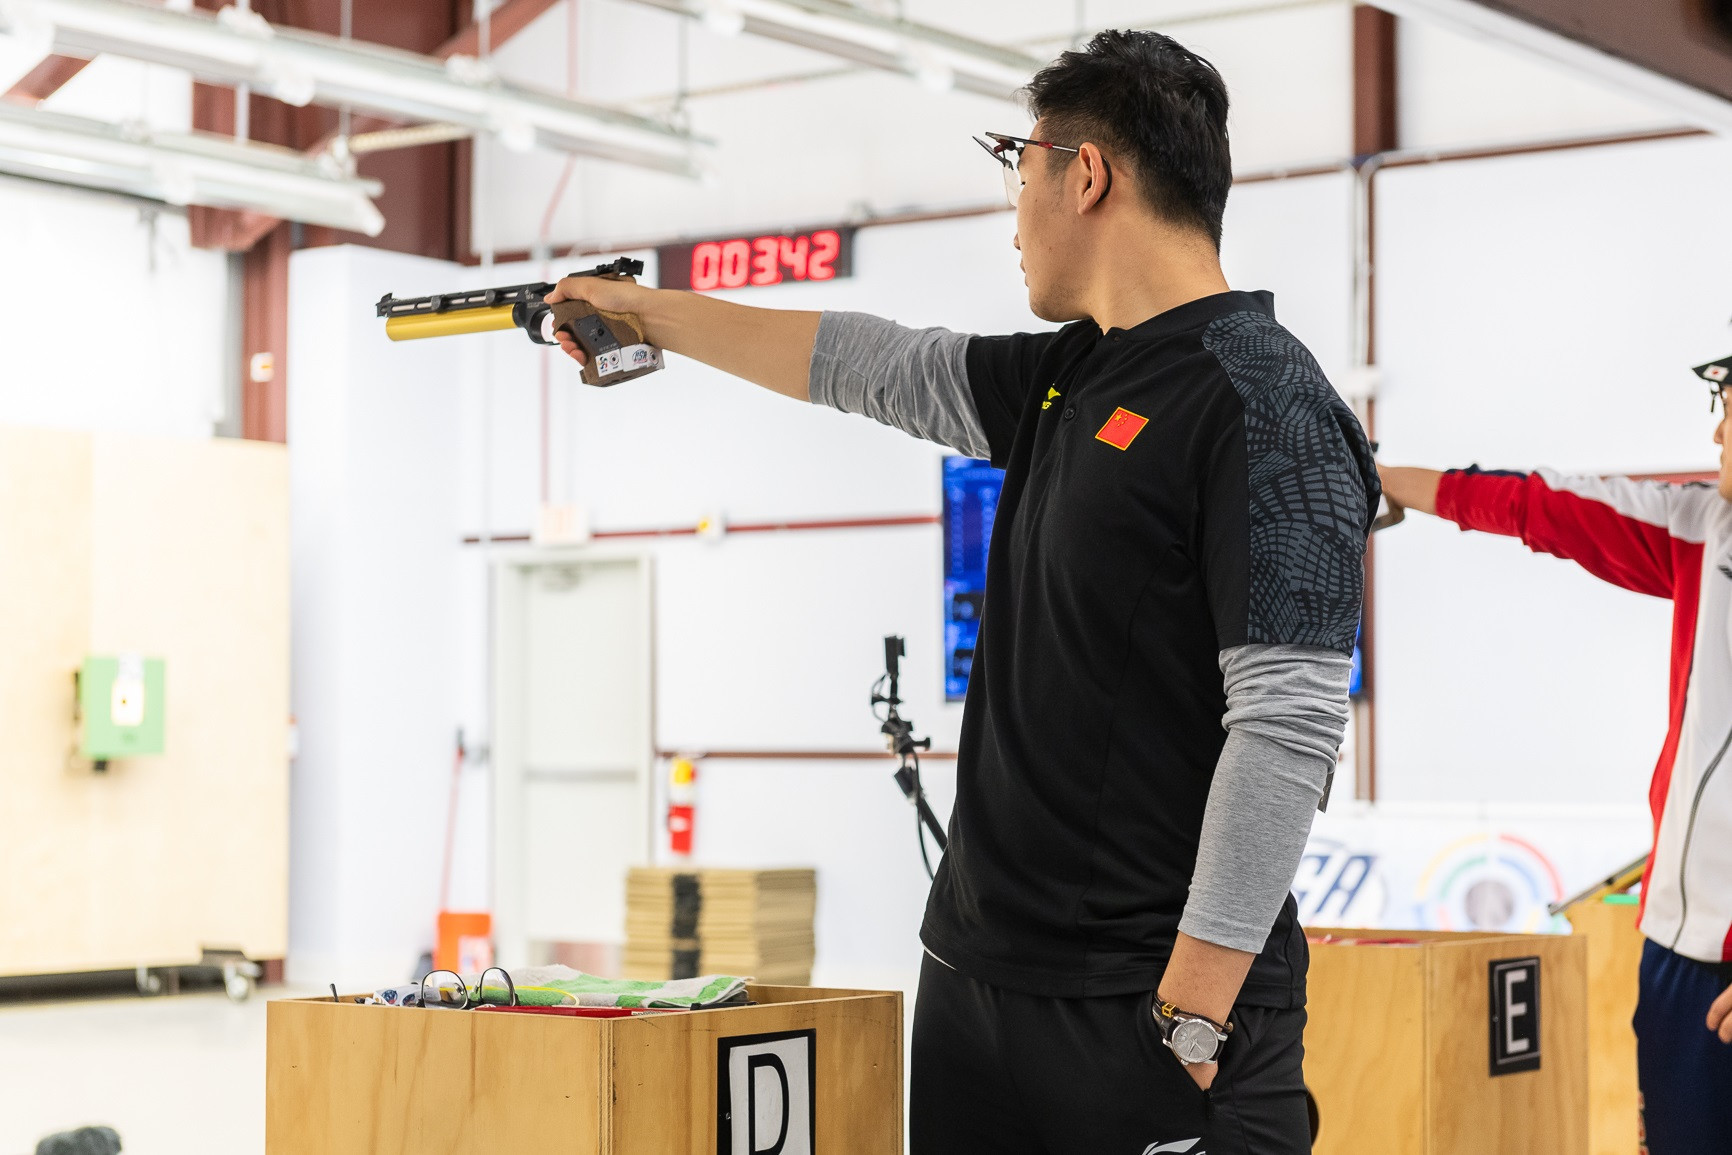 China's Wu Jiayu came out on top in the men's 10m air pistol event ©ISSF